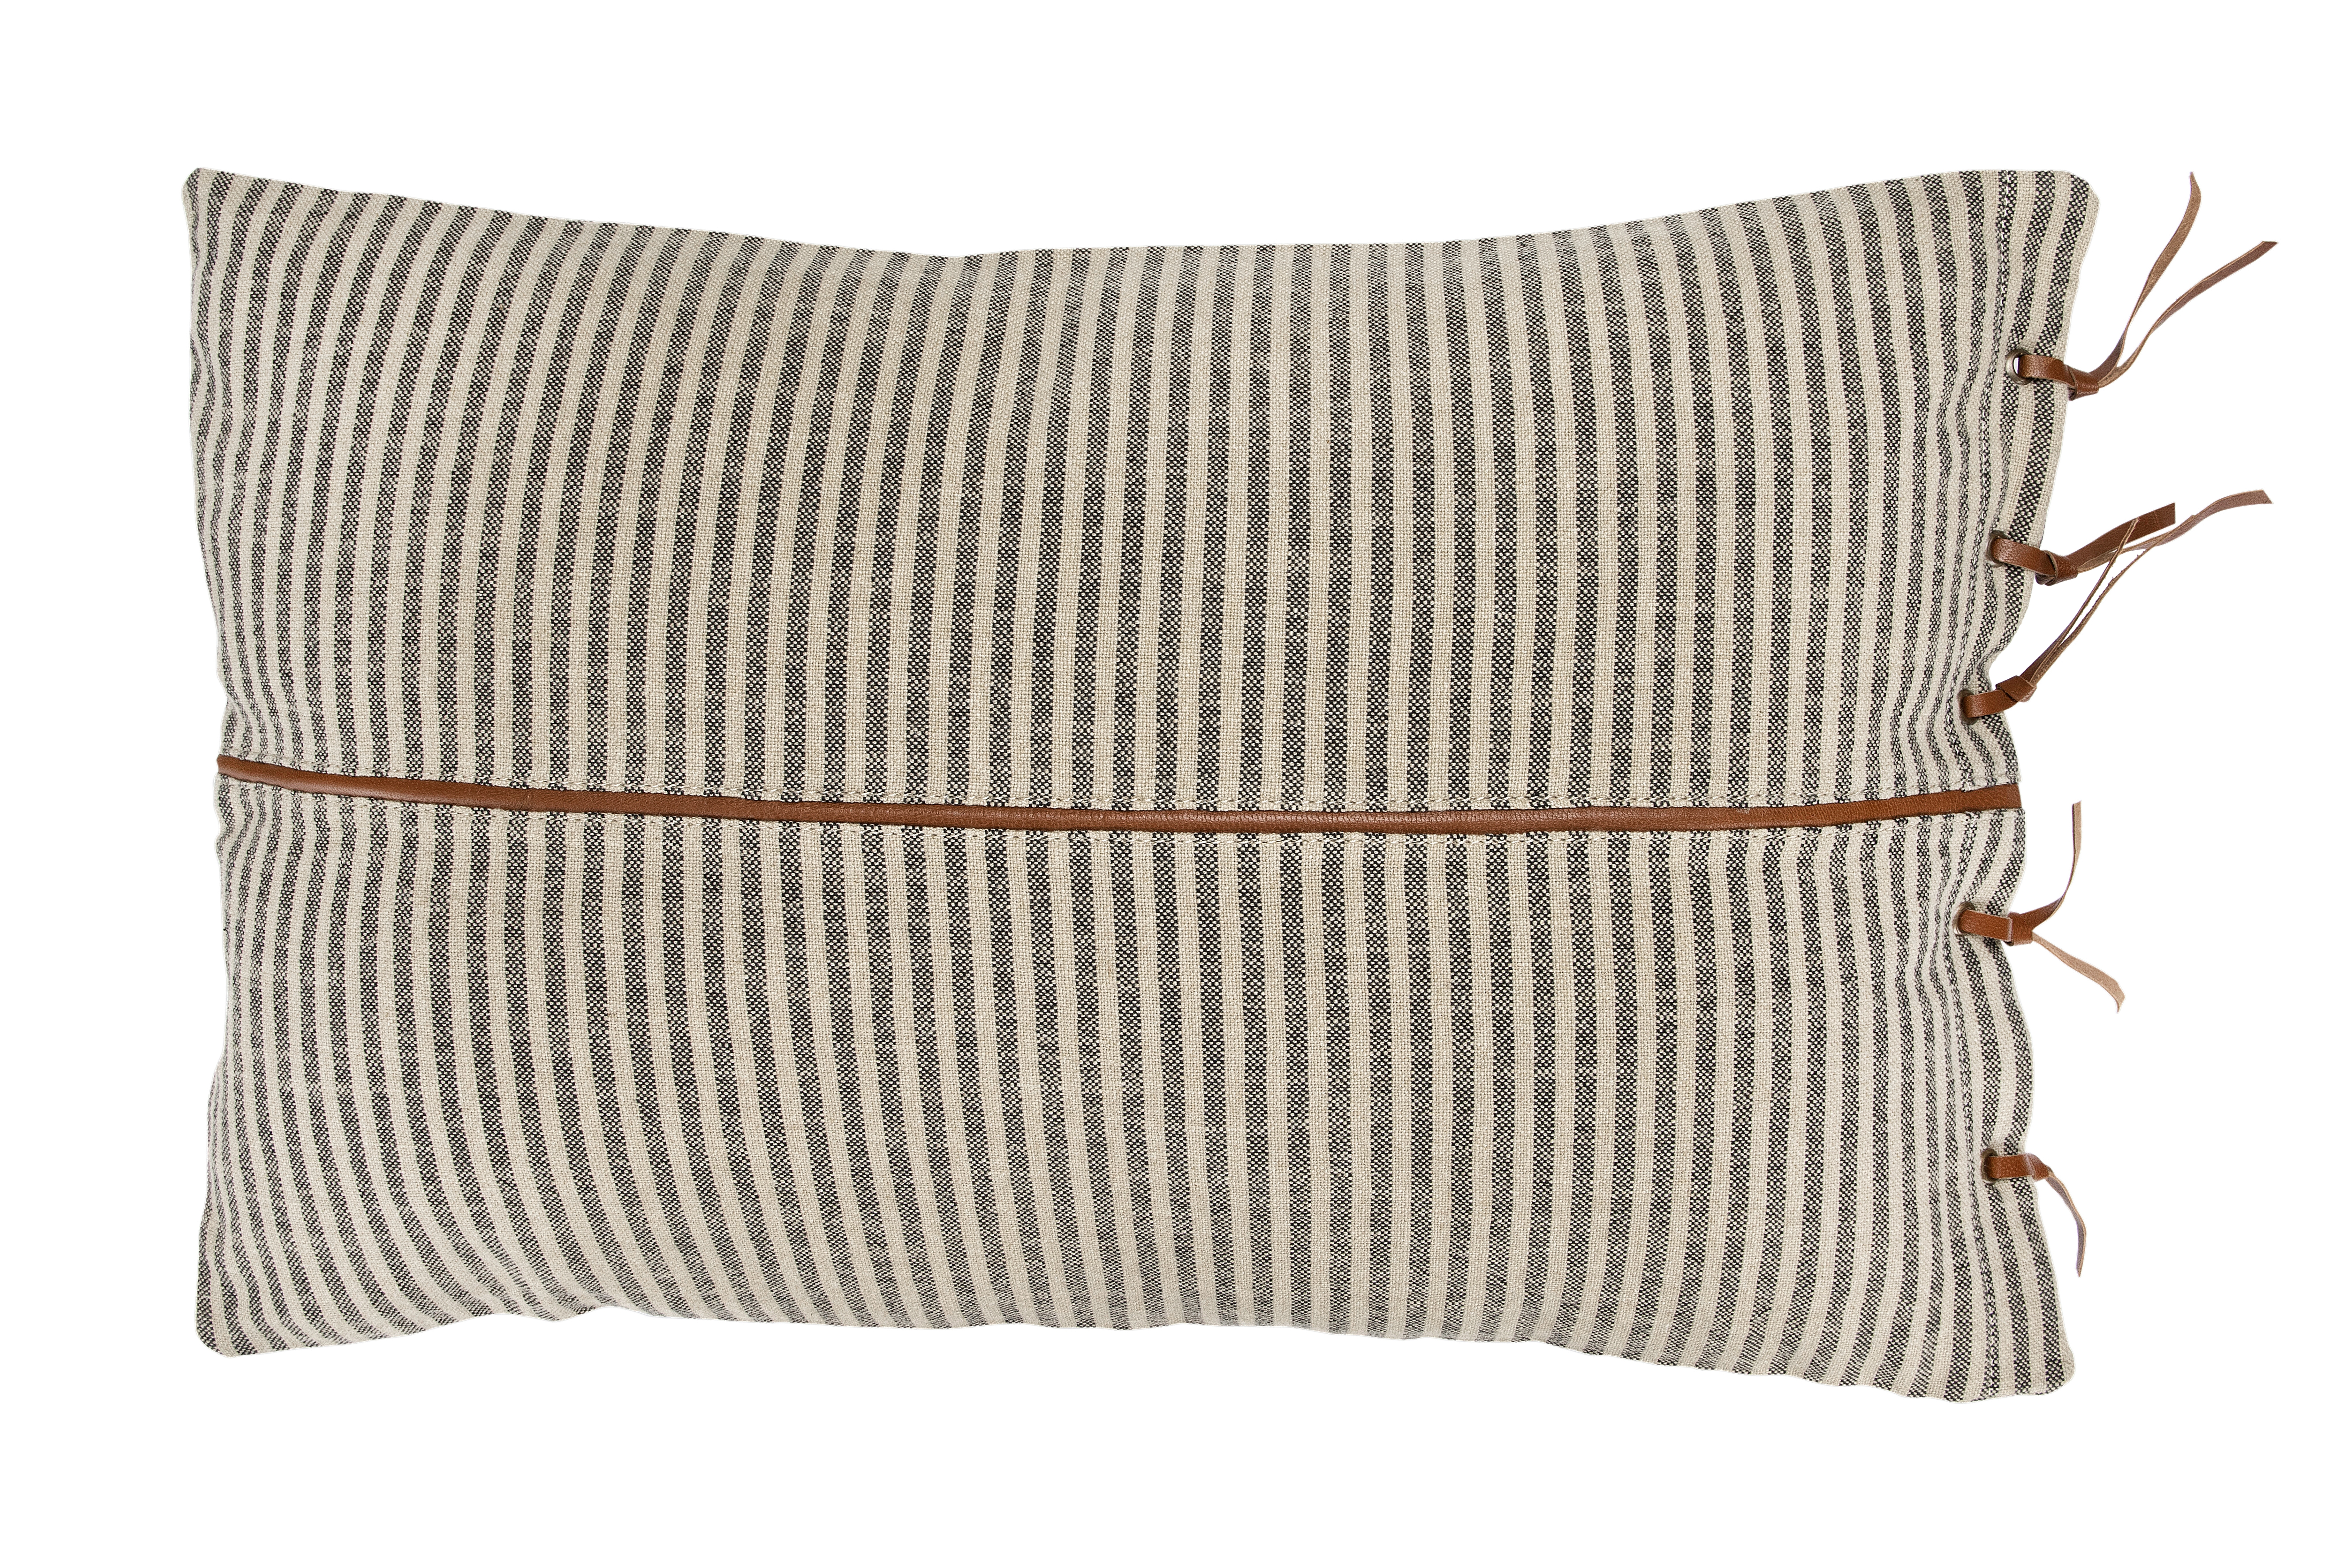 Beige & Black Striped Cotton Ticking Lumbar Pillow with Leather Trim - Image 0